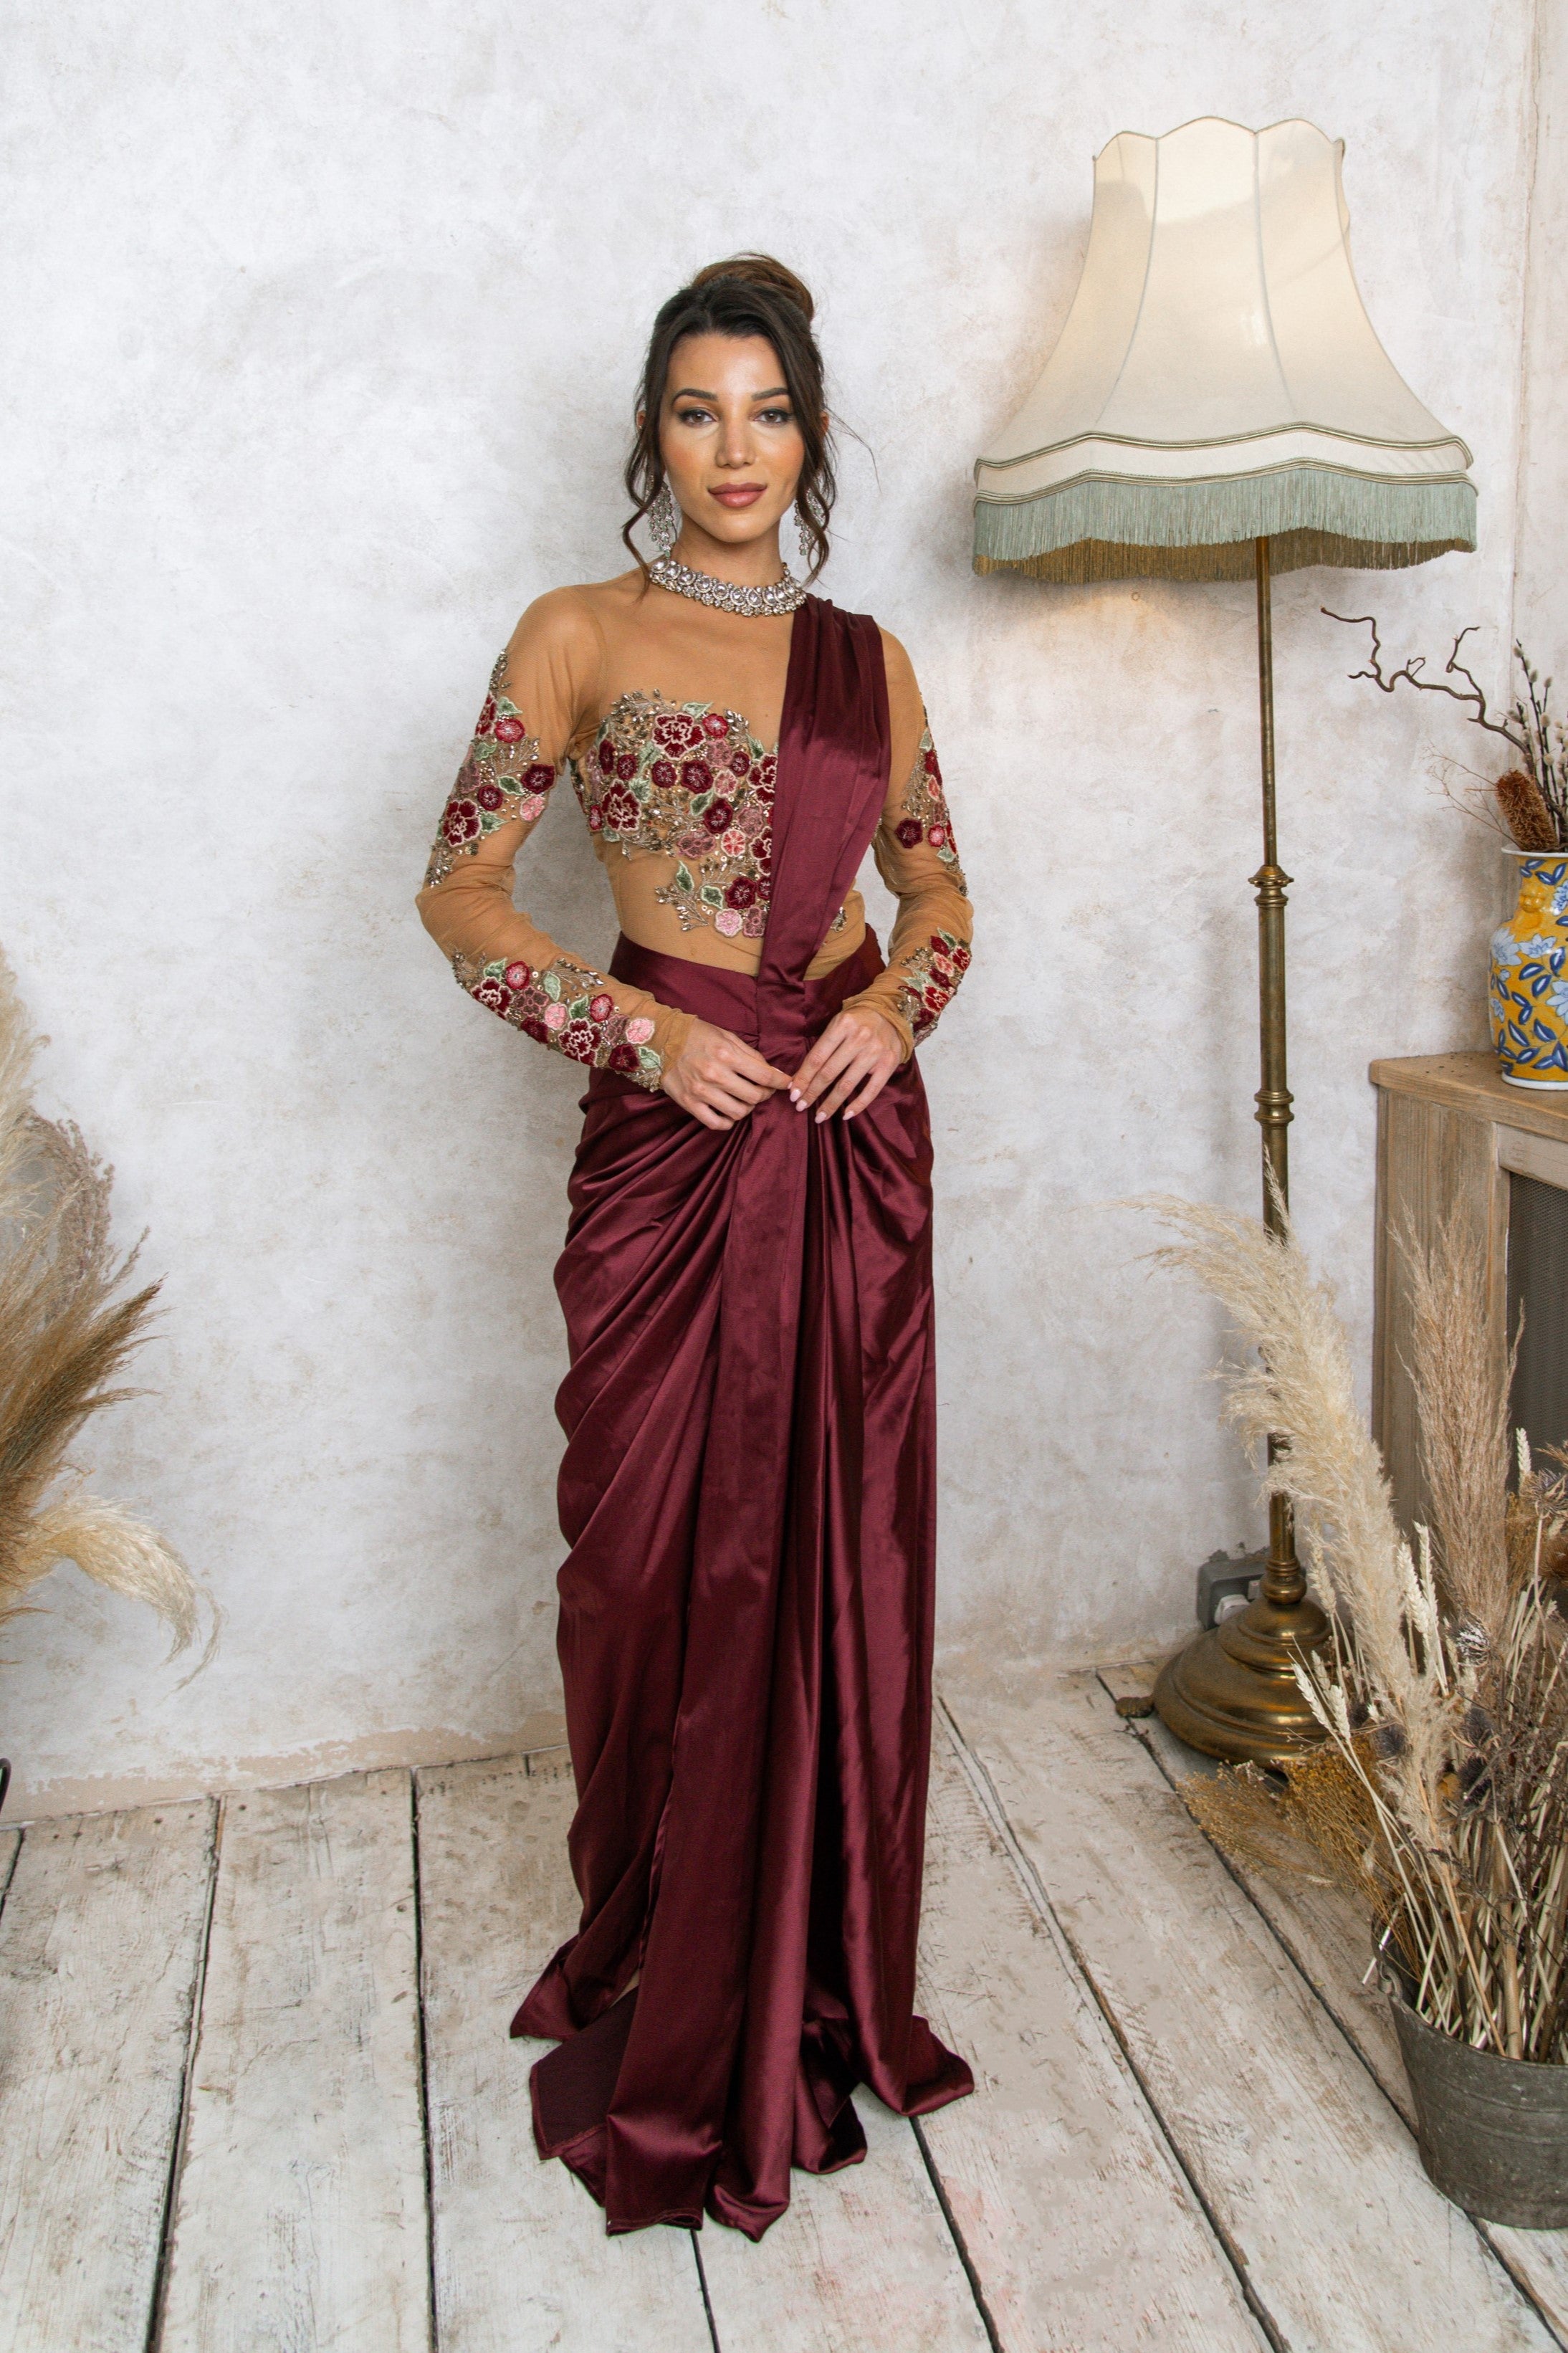 The Floral Tulle Top & Draped Saree Skirt in Wine